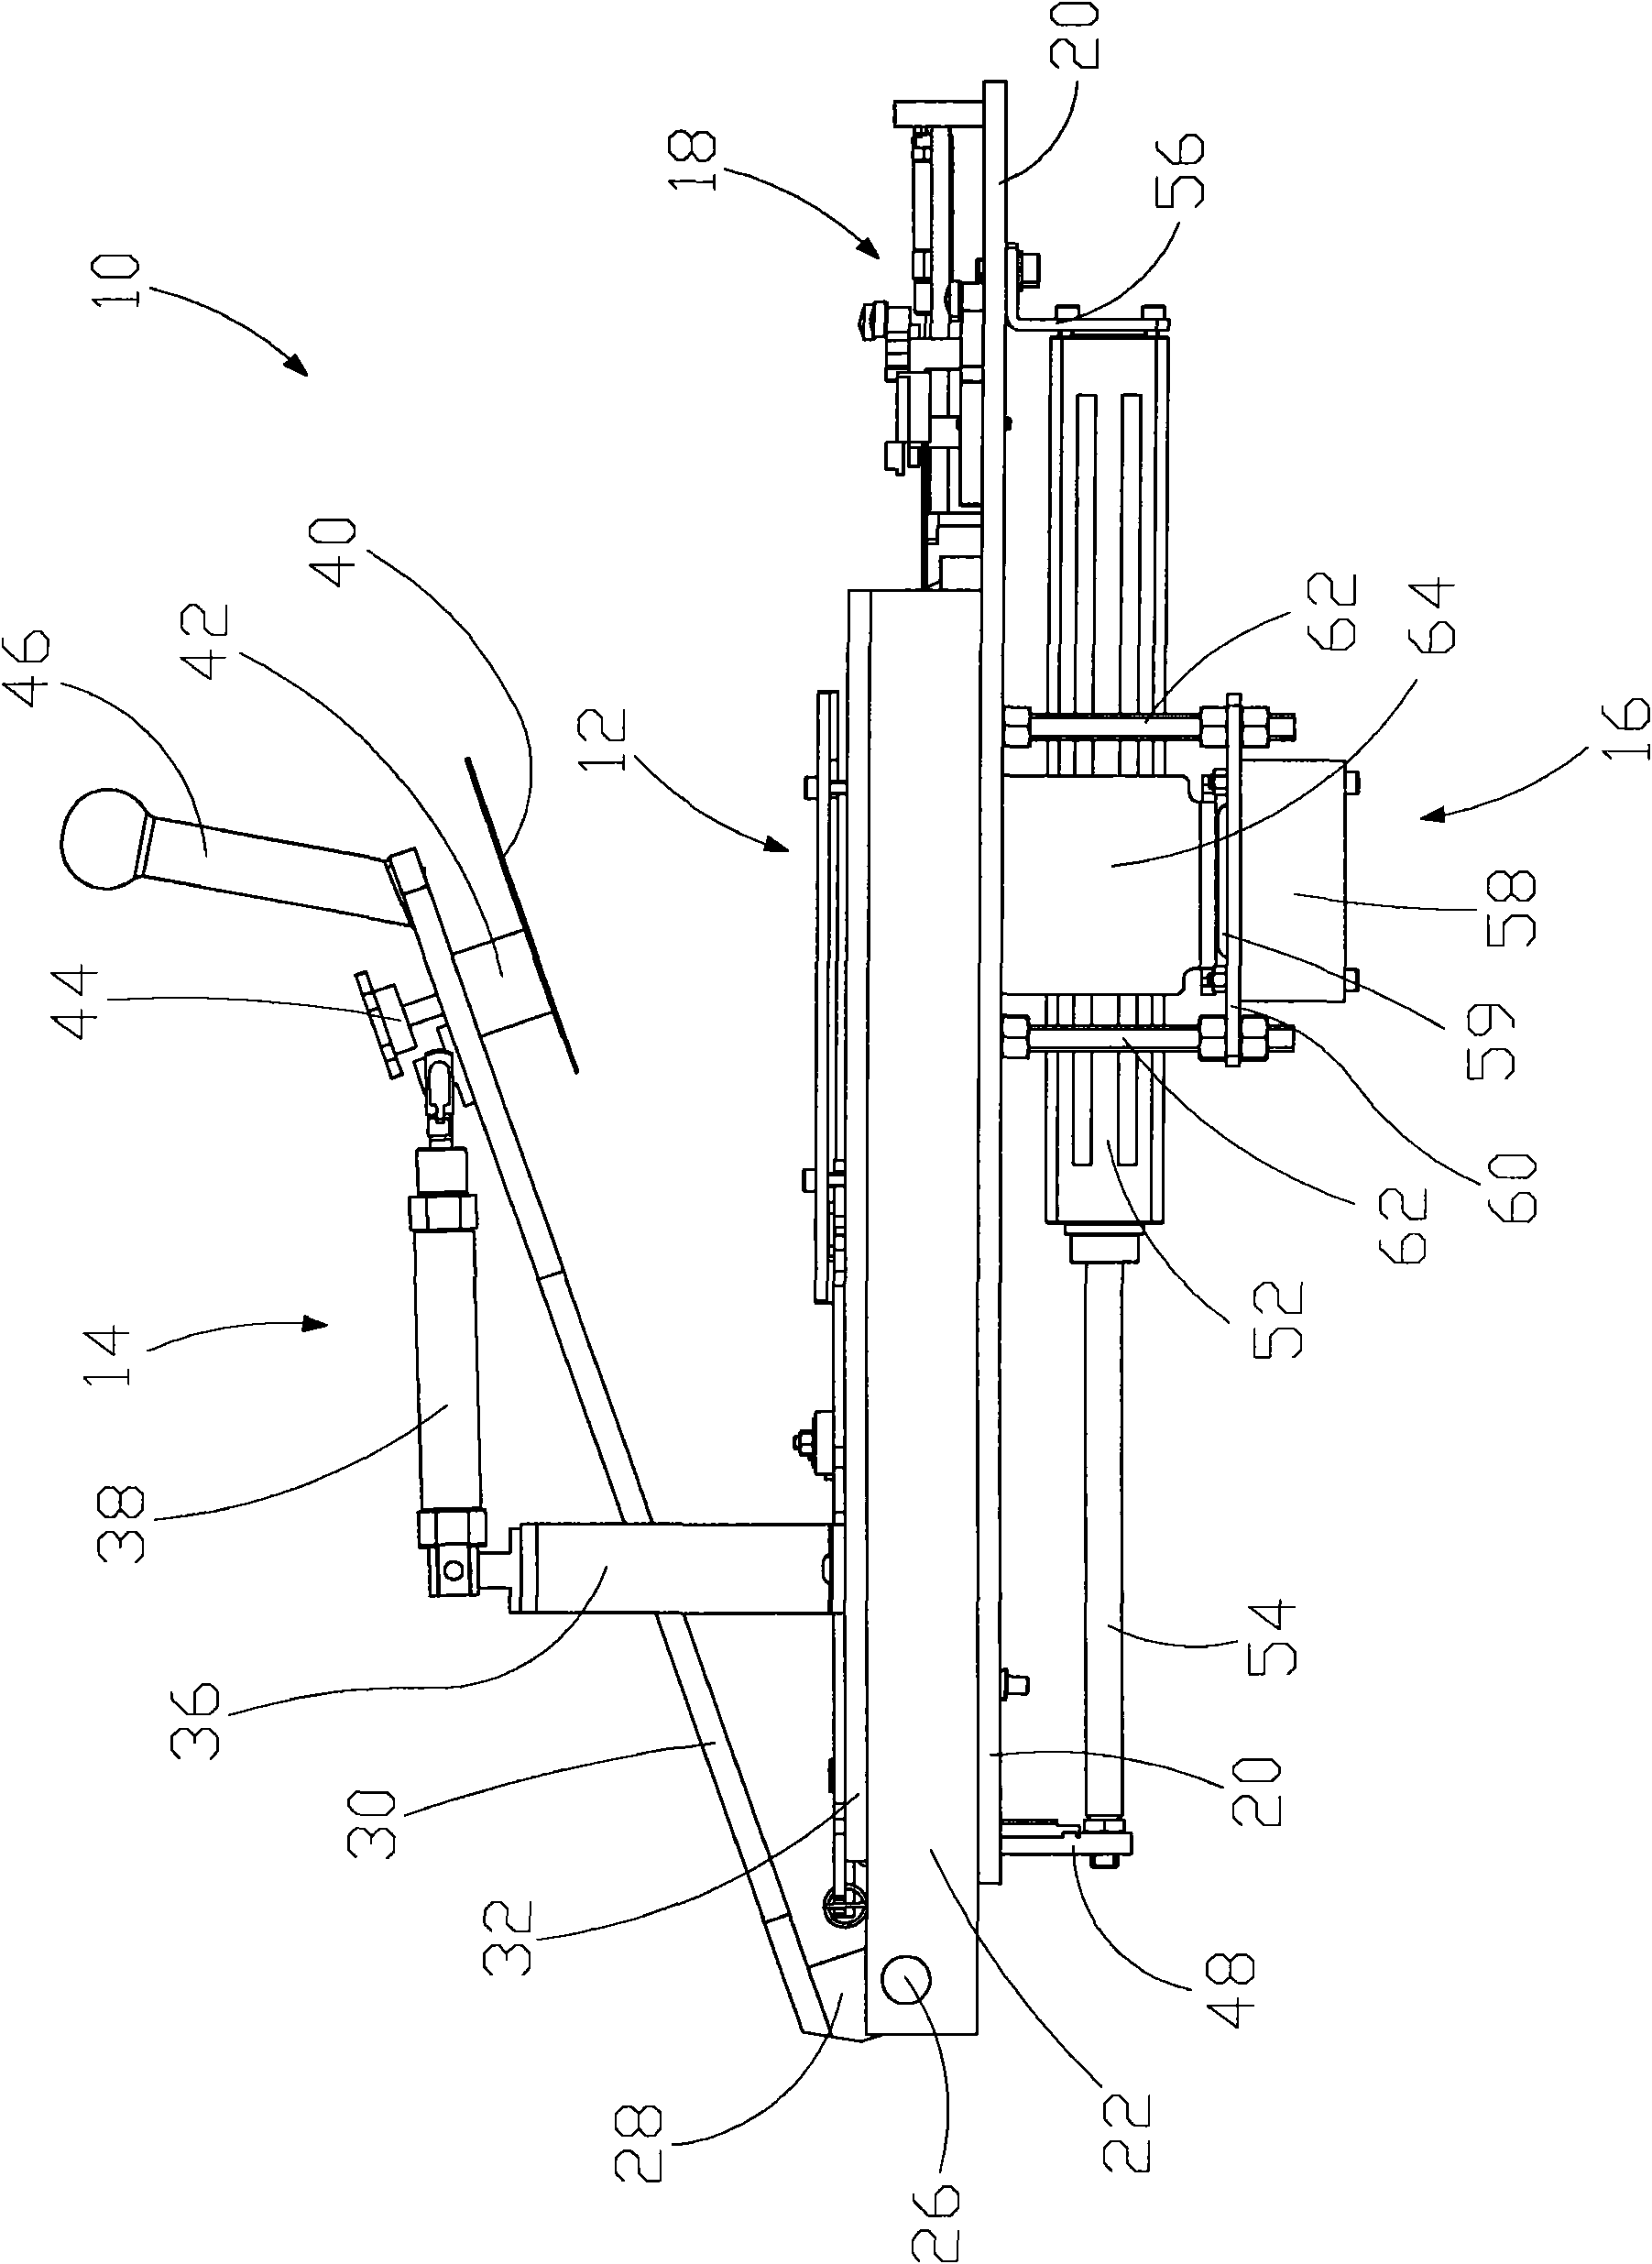 Machine for forming and ironing folds in pieces of cloth